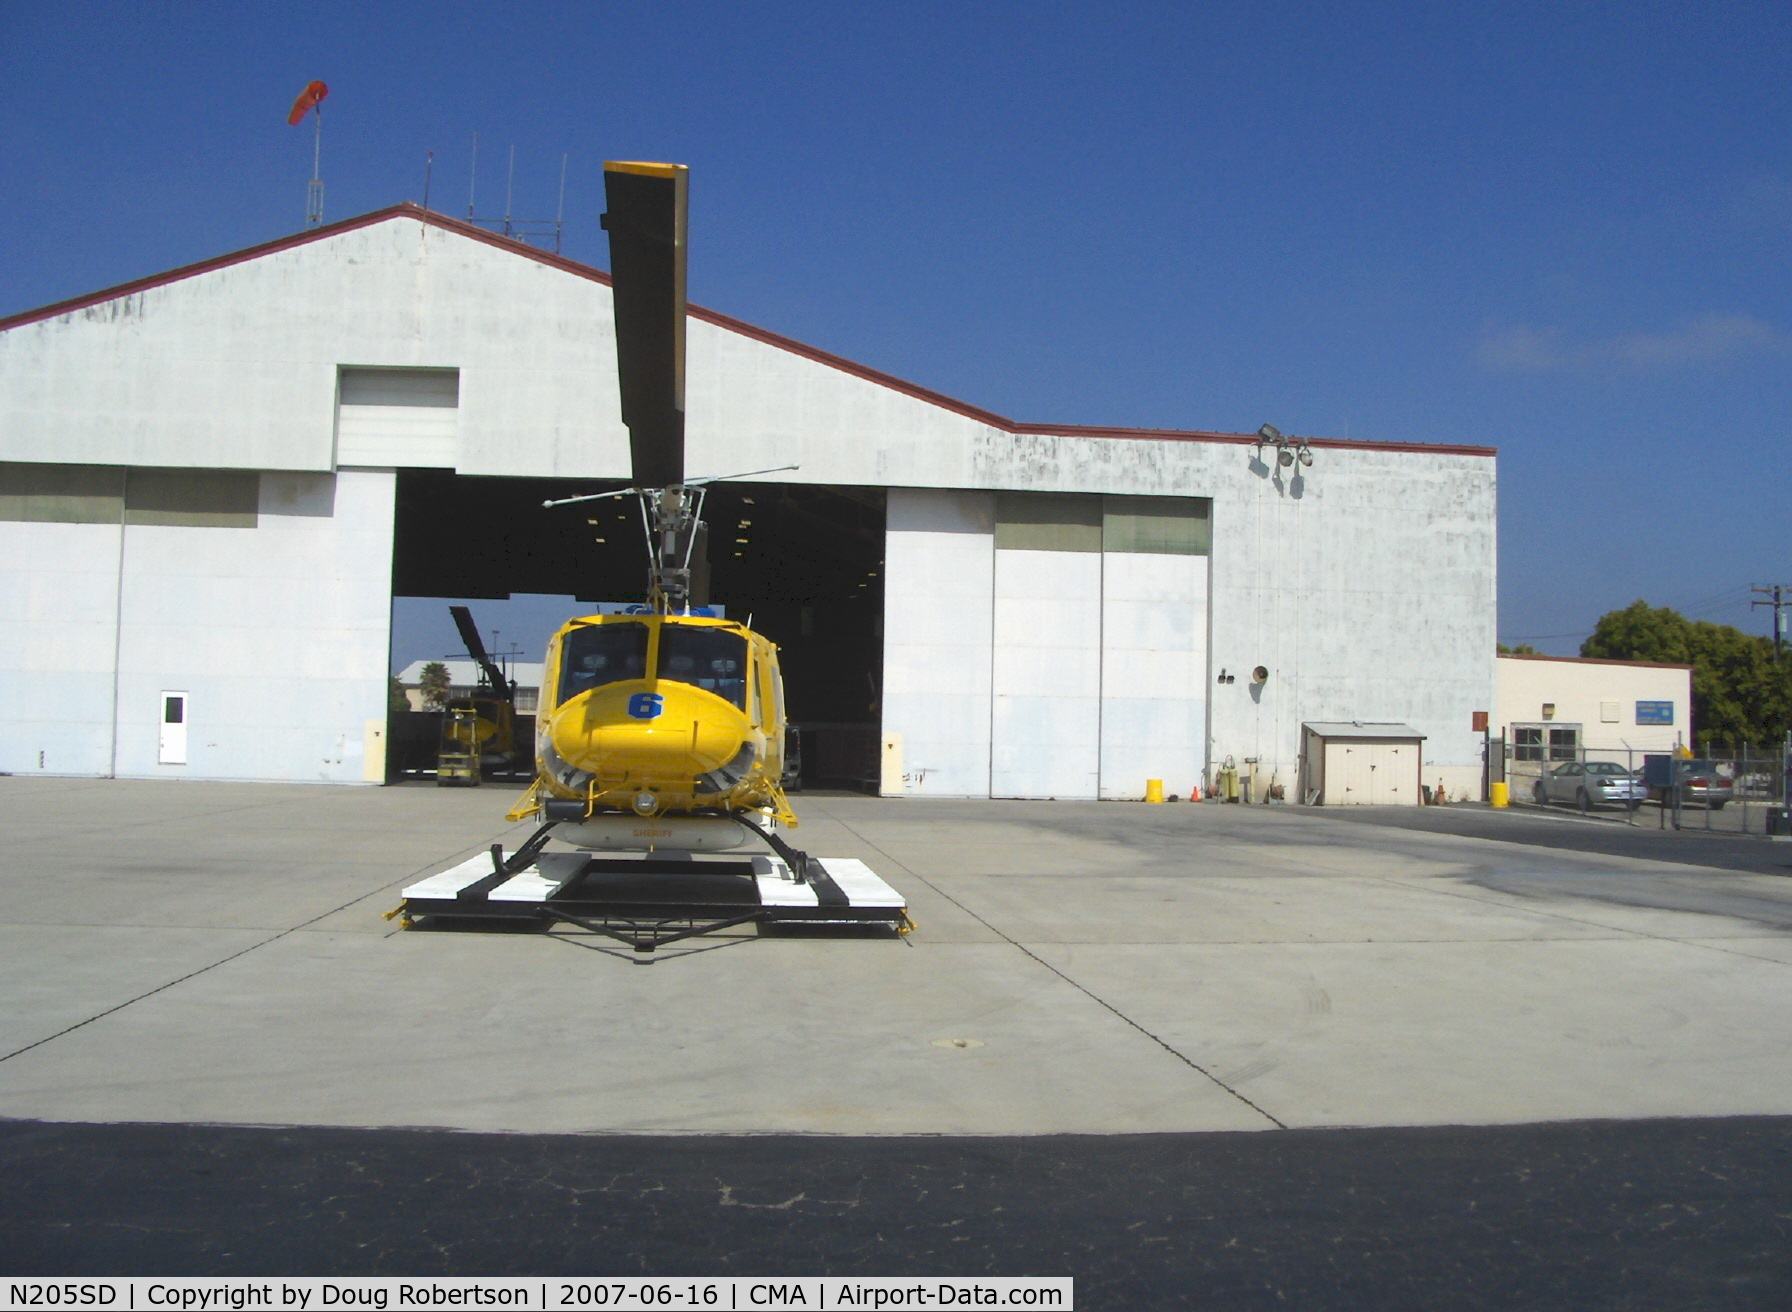 N205SD, 1970 Bell HH-1H Iroquois C/N 17116, 1970 Bell HH-1H, Ventura County Sheriff's Dept. #6, completely rebuilt from wartime service as Bell Iroquois Huey, one Lycoming T53-C-13 turboshaft 1,400 shp, Search & Rescue equipped